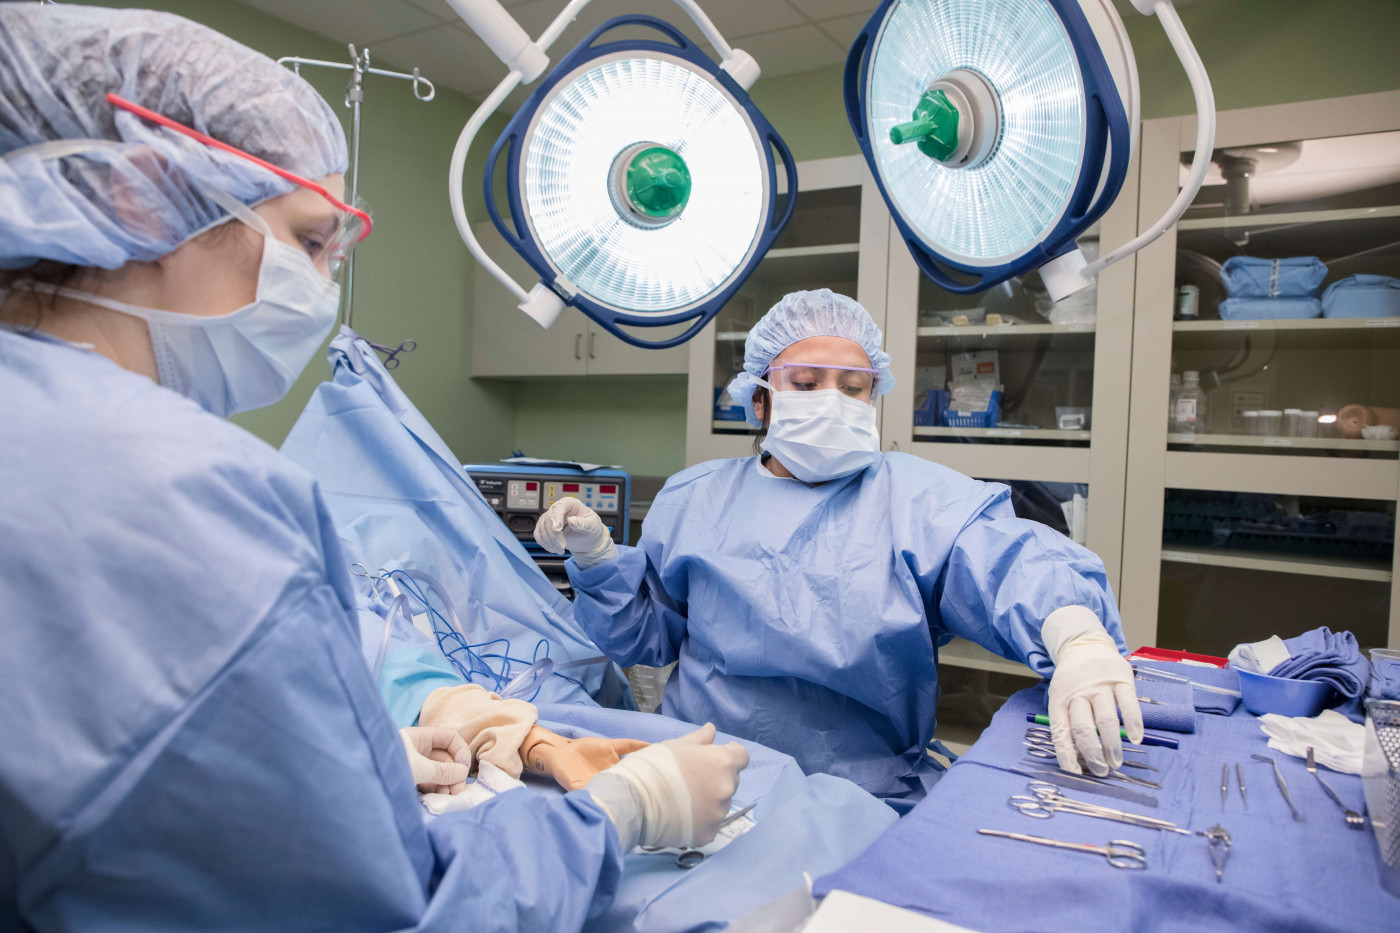 Students working in an operating room during surgery